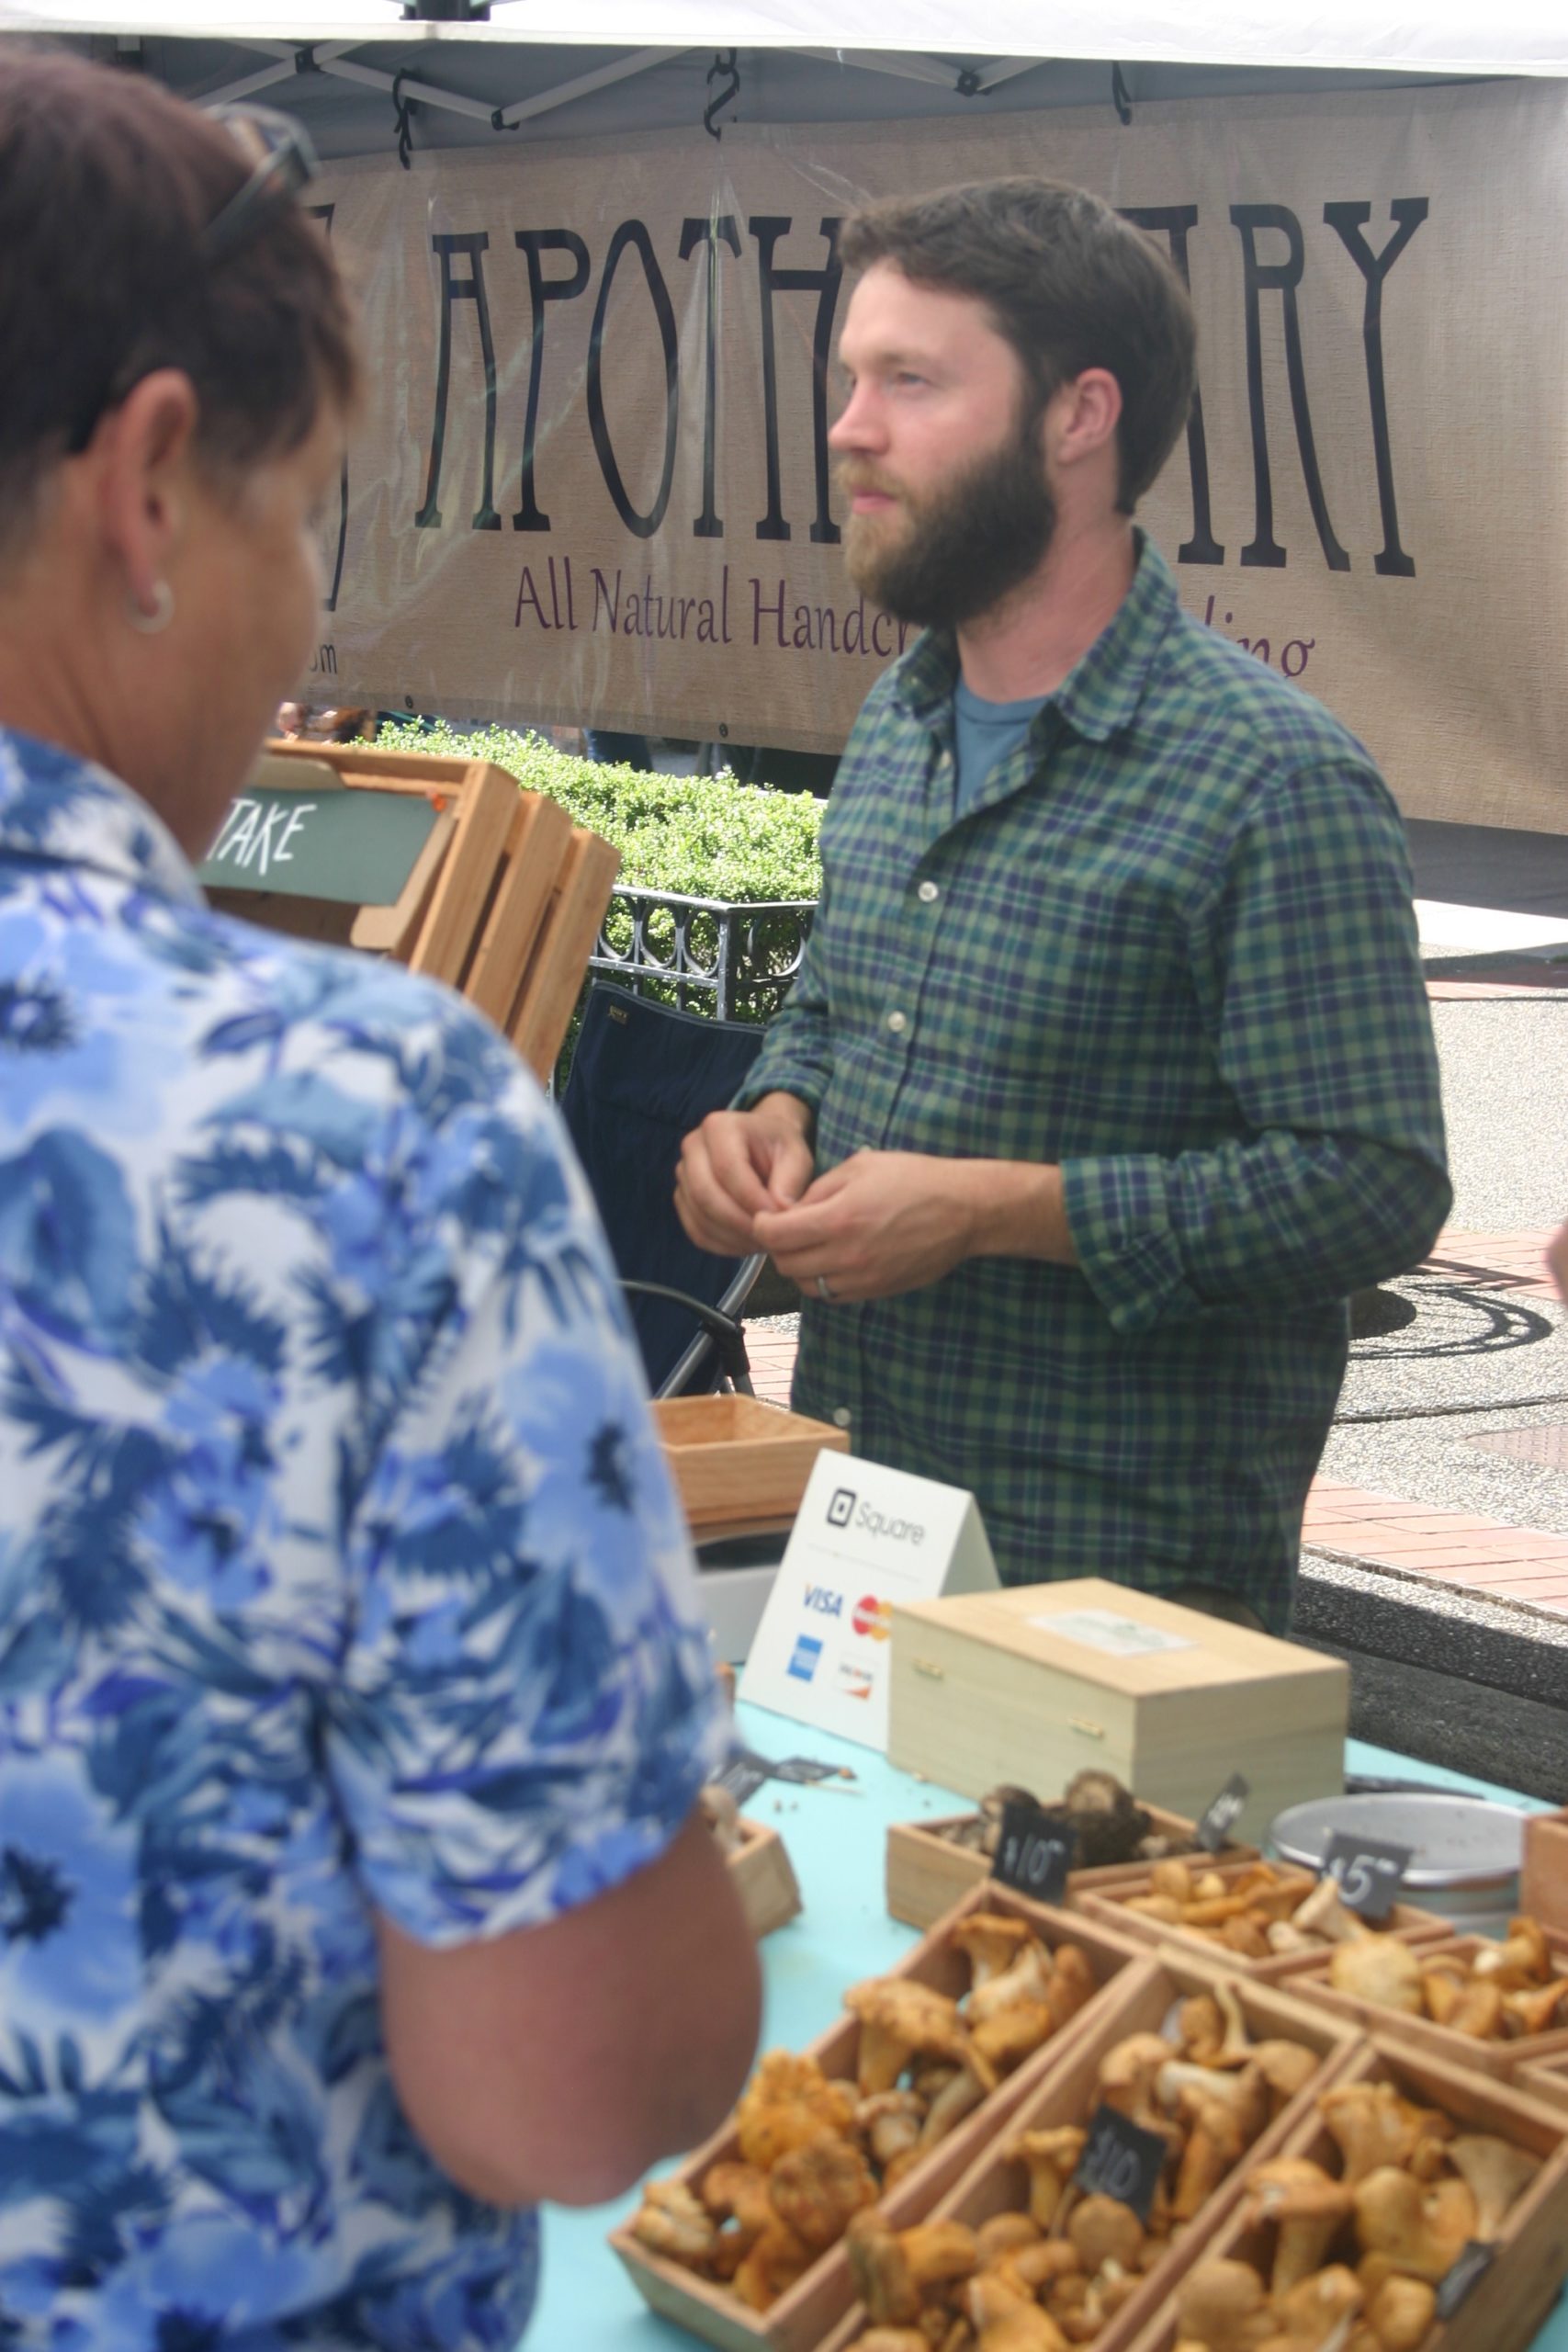 Adam DeLeo, owner of Adam's Mushrooms on the Key Peninsula, speaks with customers about the varieties of farm-grown and wild mushrooms at his booth at the Broadway Farmers' Market in Tacoma, July 15, 2016. Credit: David Guest / TDI